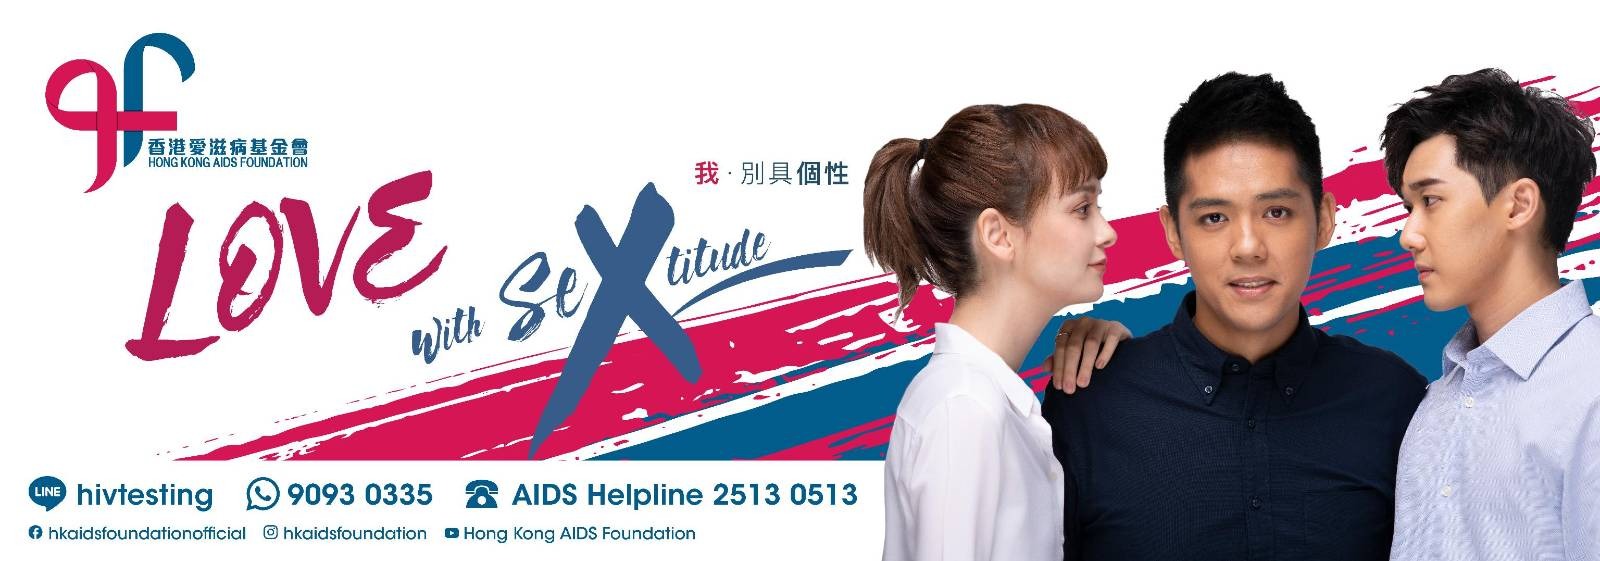 Hong Kong AIDS Foundation Love With Sextitude